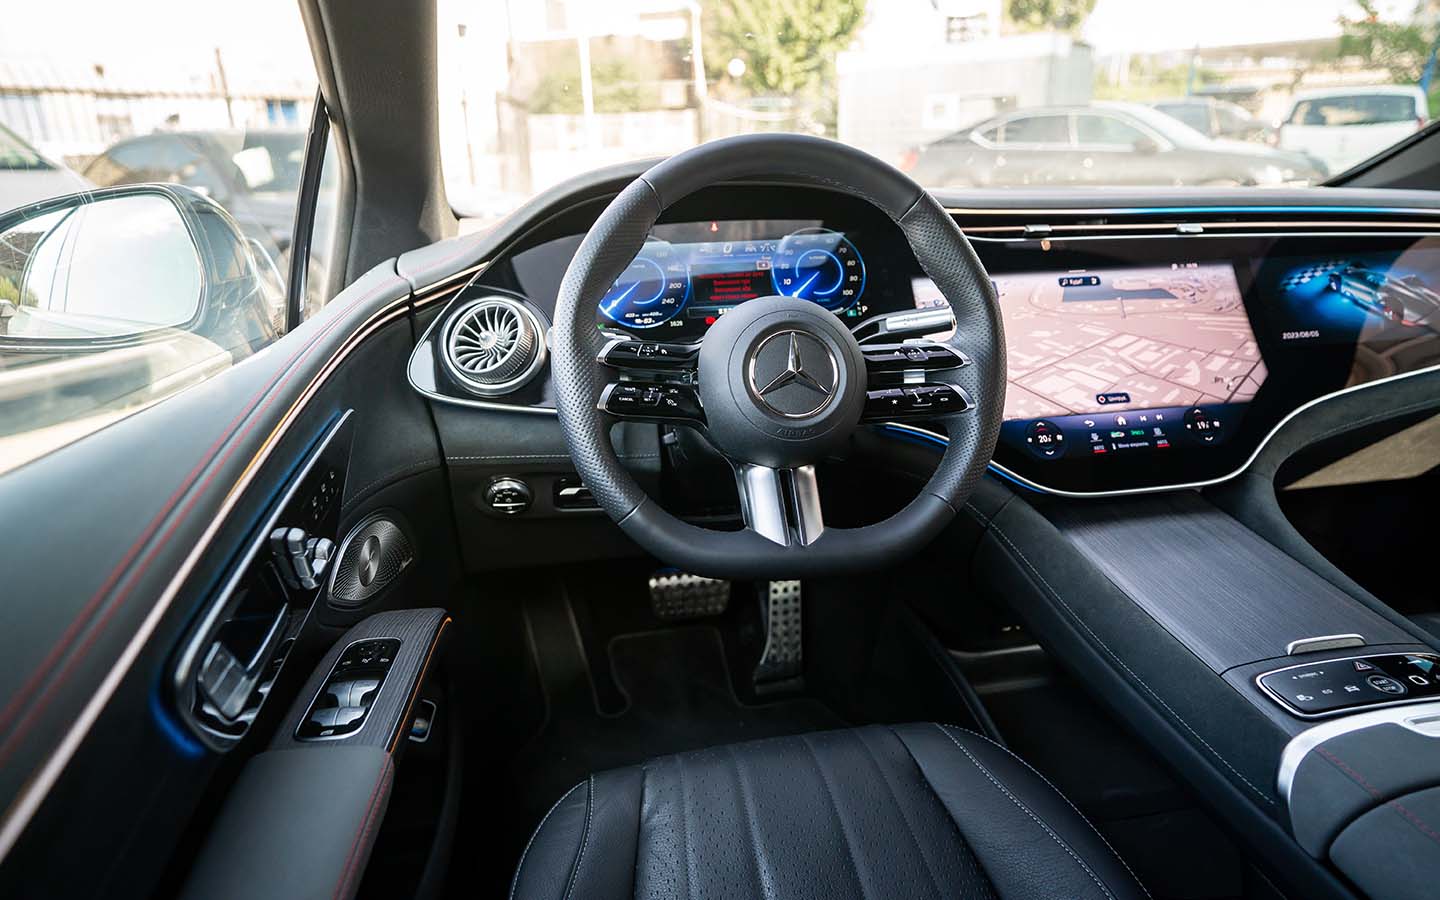 the Mercedes AI-Powered Voice Assistant has a wide array of features